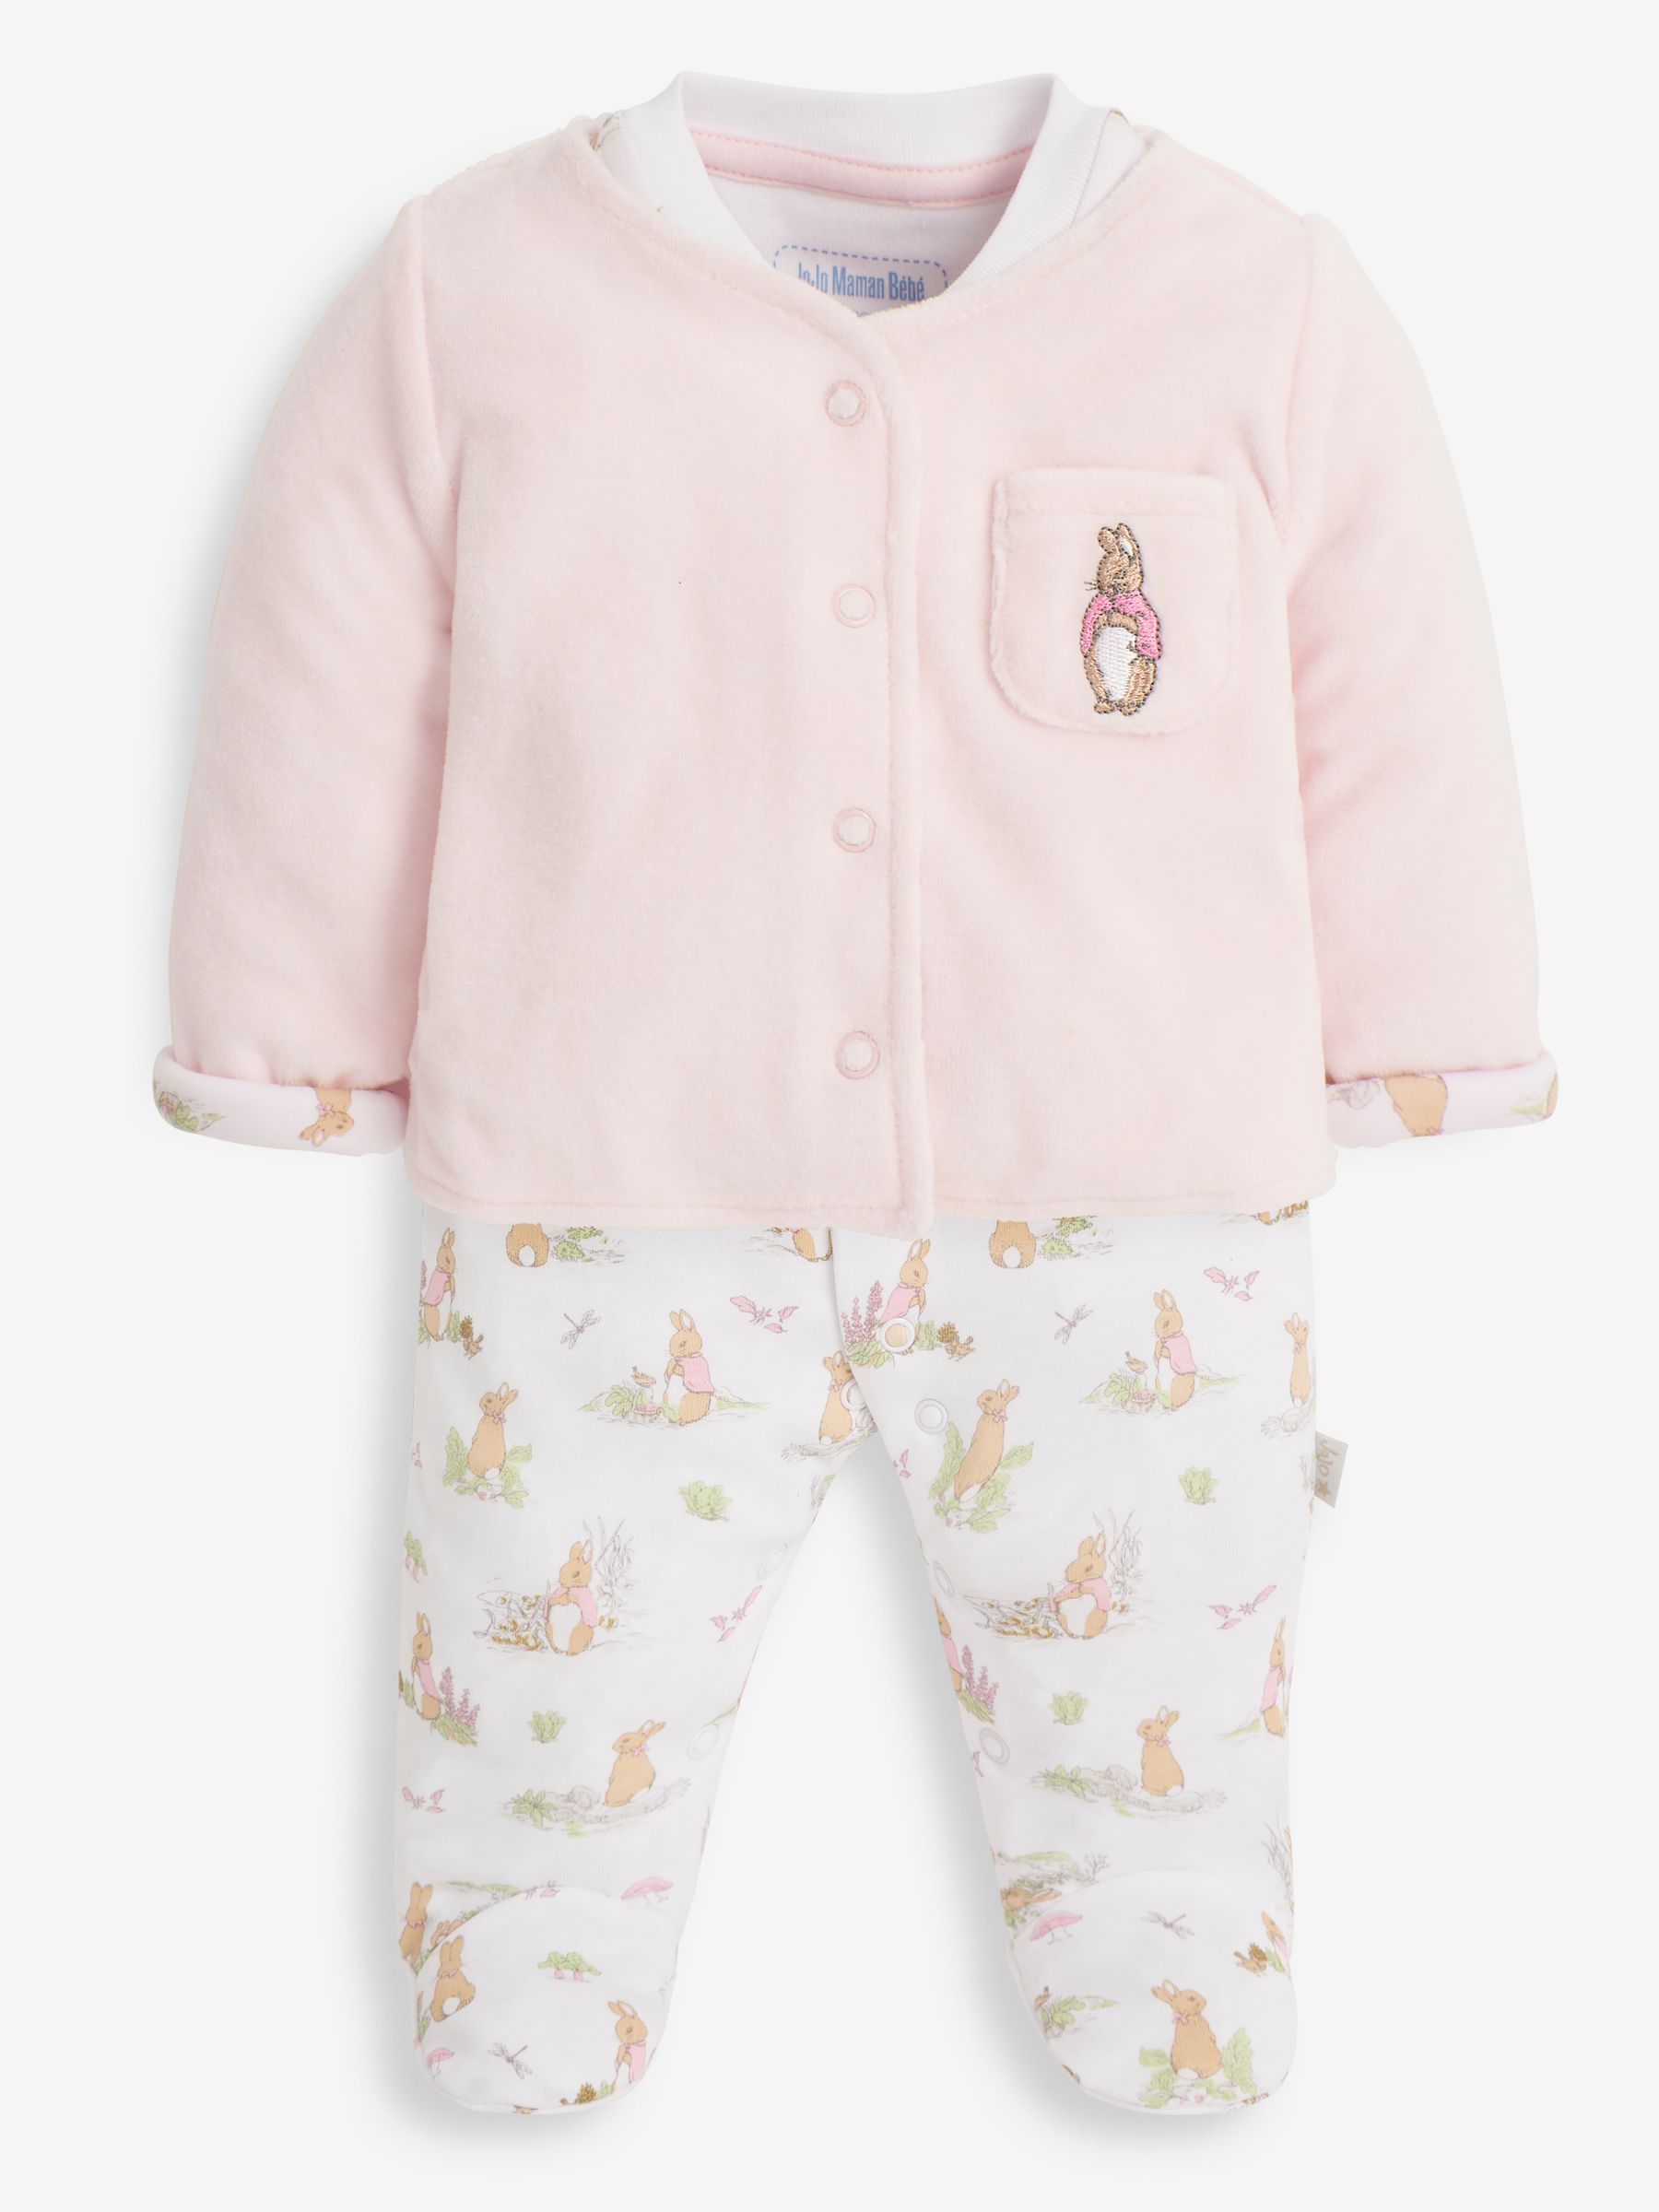 Buy 3-Piece Flopsy Bunny Sleepsuit, Jacket & Hat Set in Pink from the ...